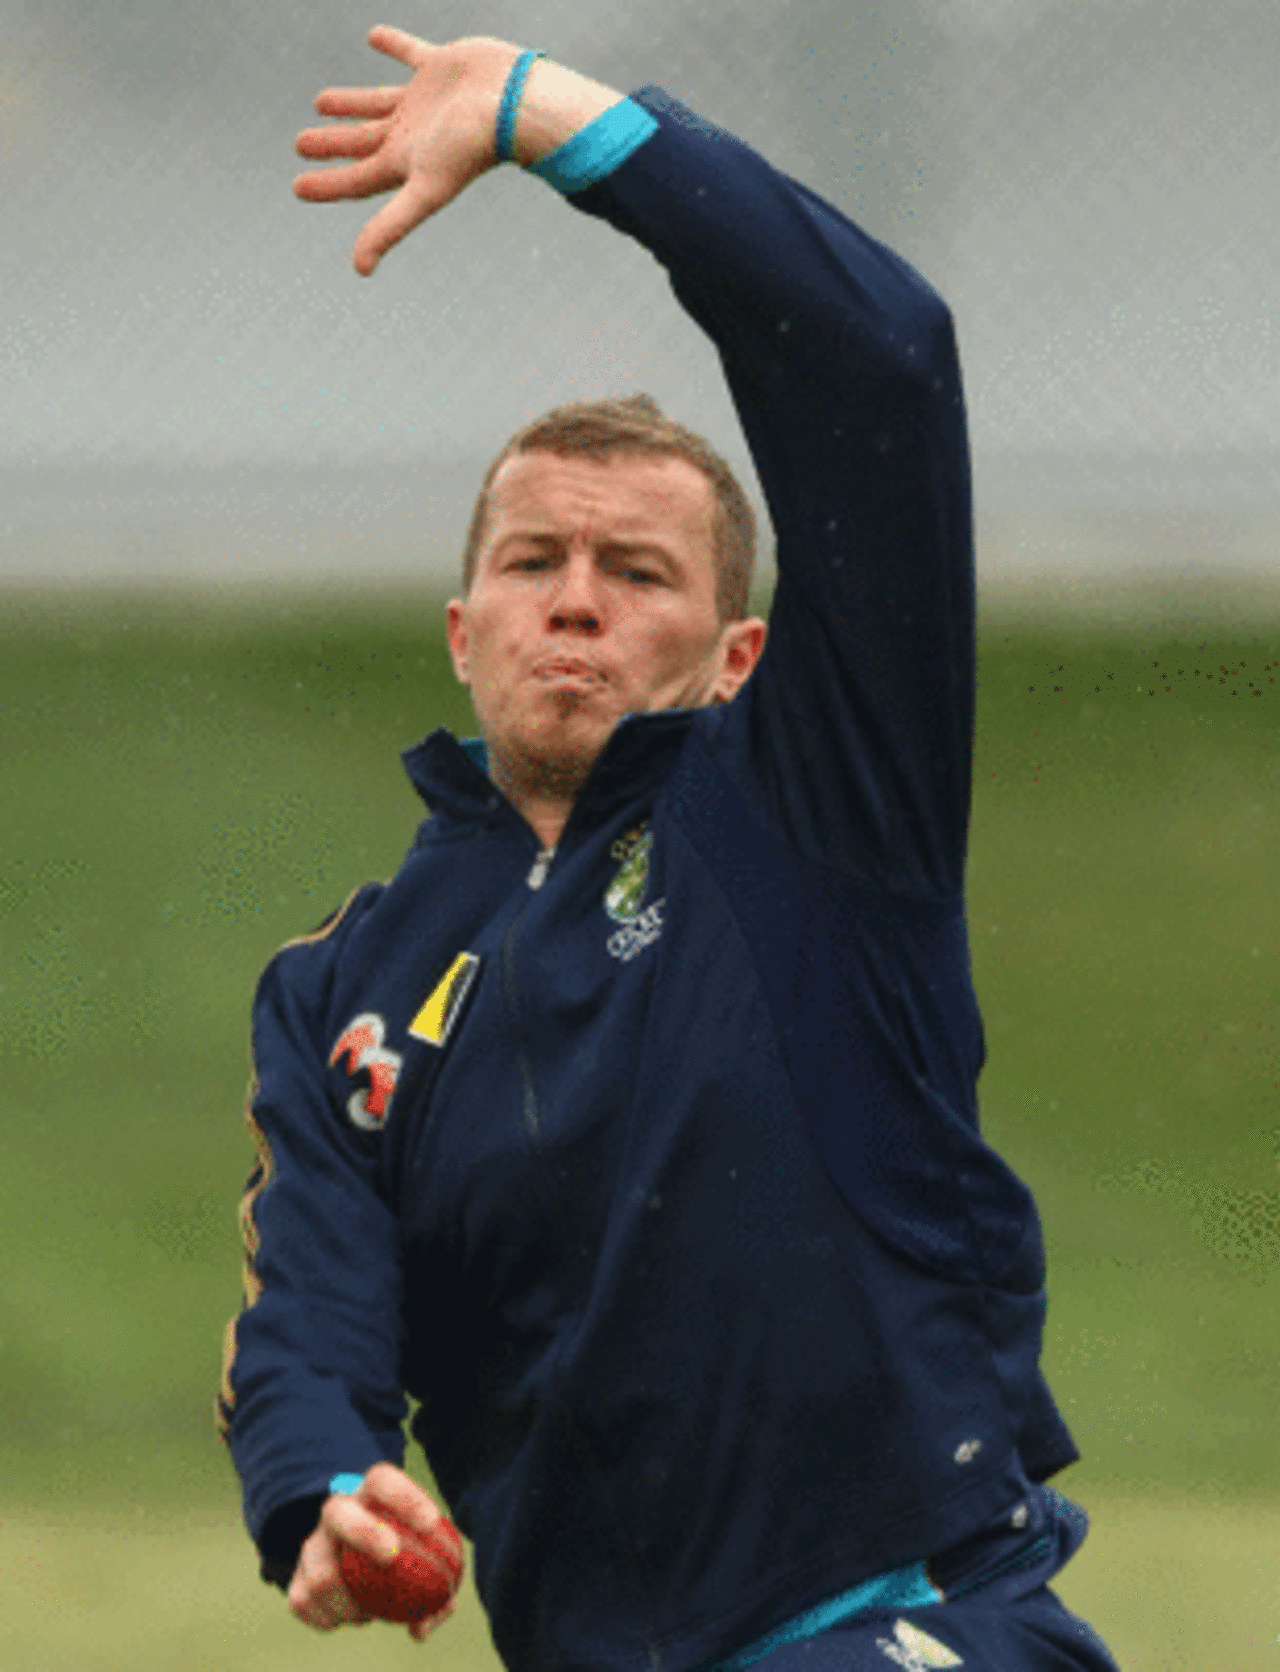 Peter Siddle fine tunes at training, Hobart, January 13, 2010